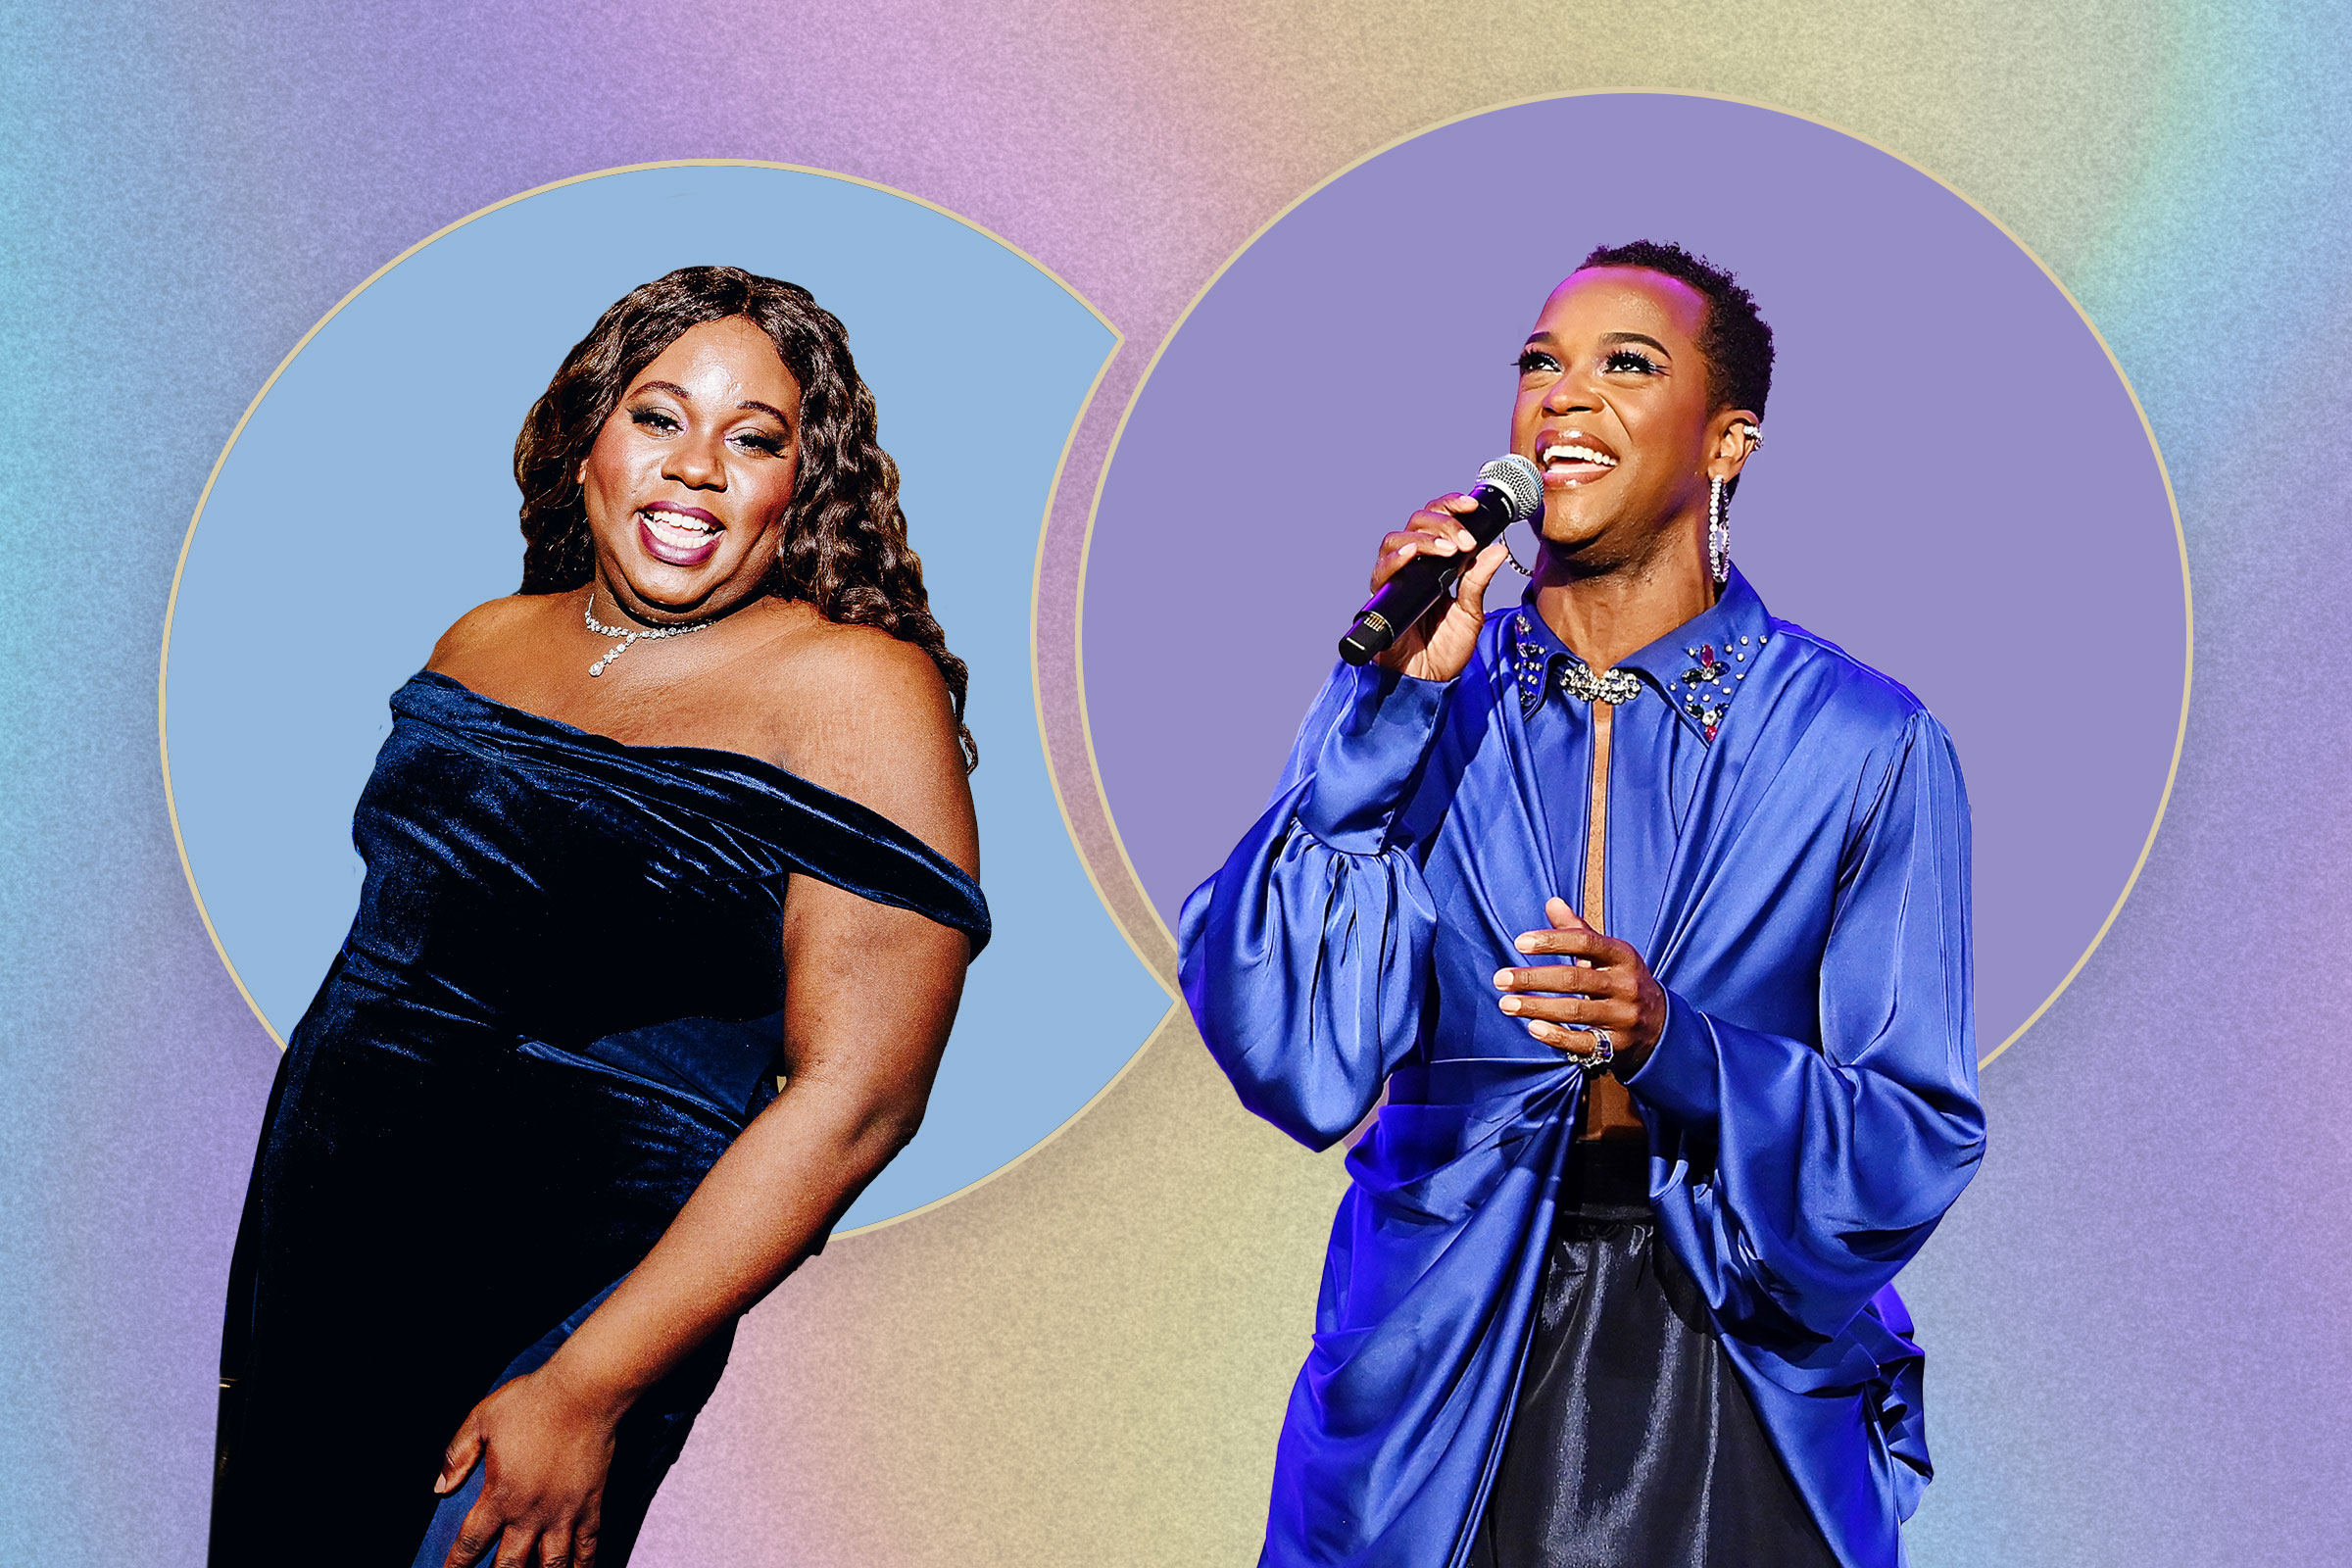 This year, Alex Newell (left) and J. Harrison Ghee (right) became the first out nonbinary acting Tony nominees. (Getty Images)